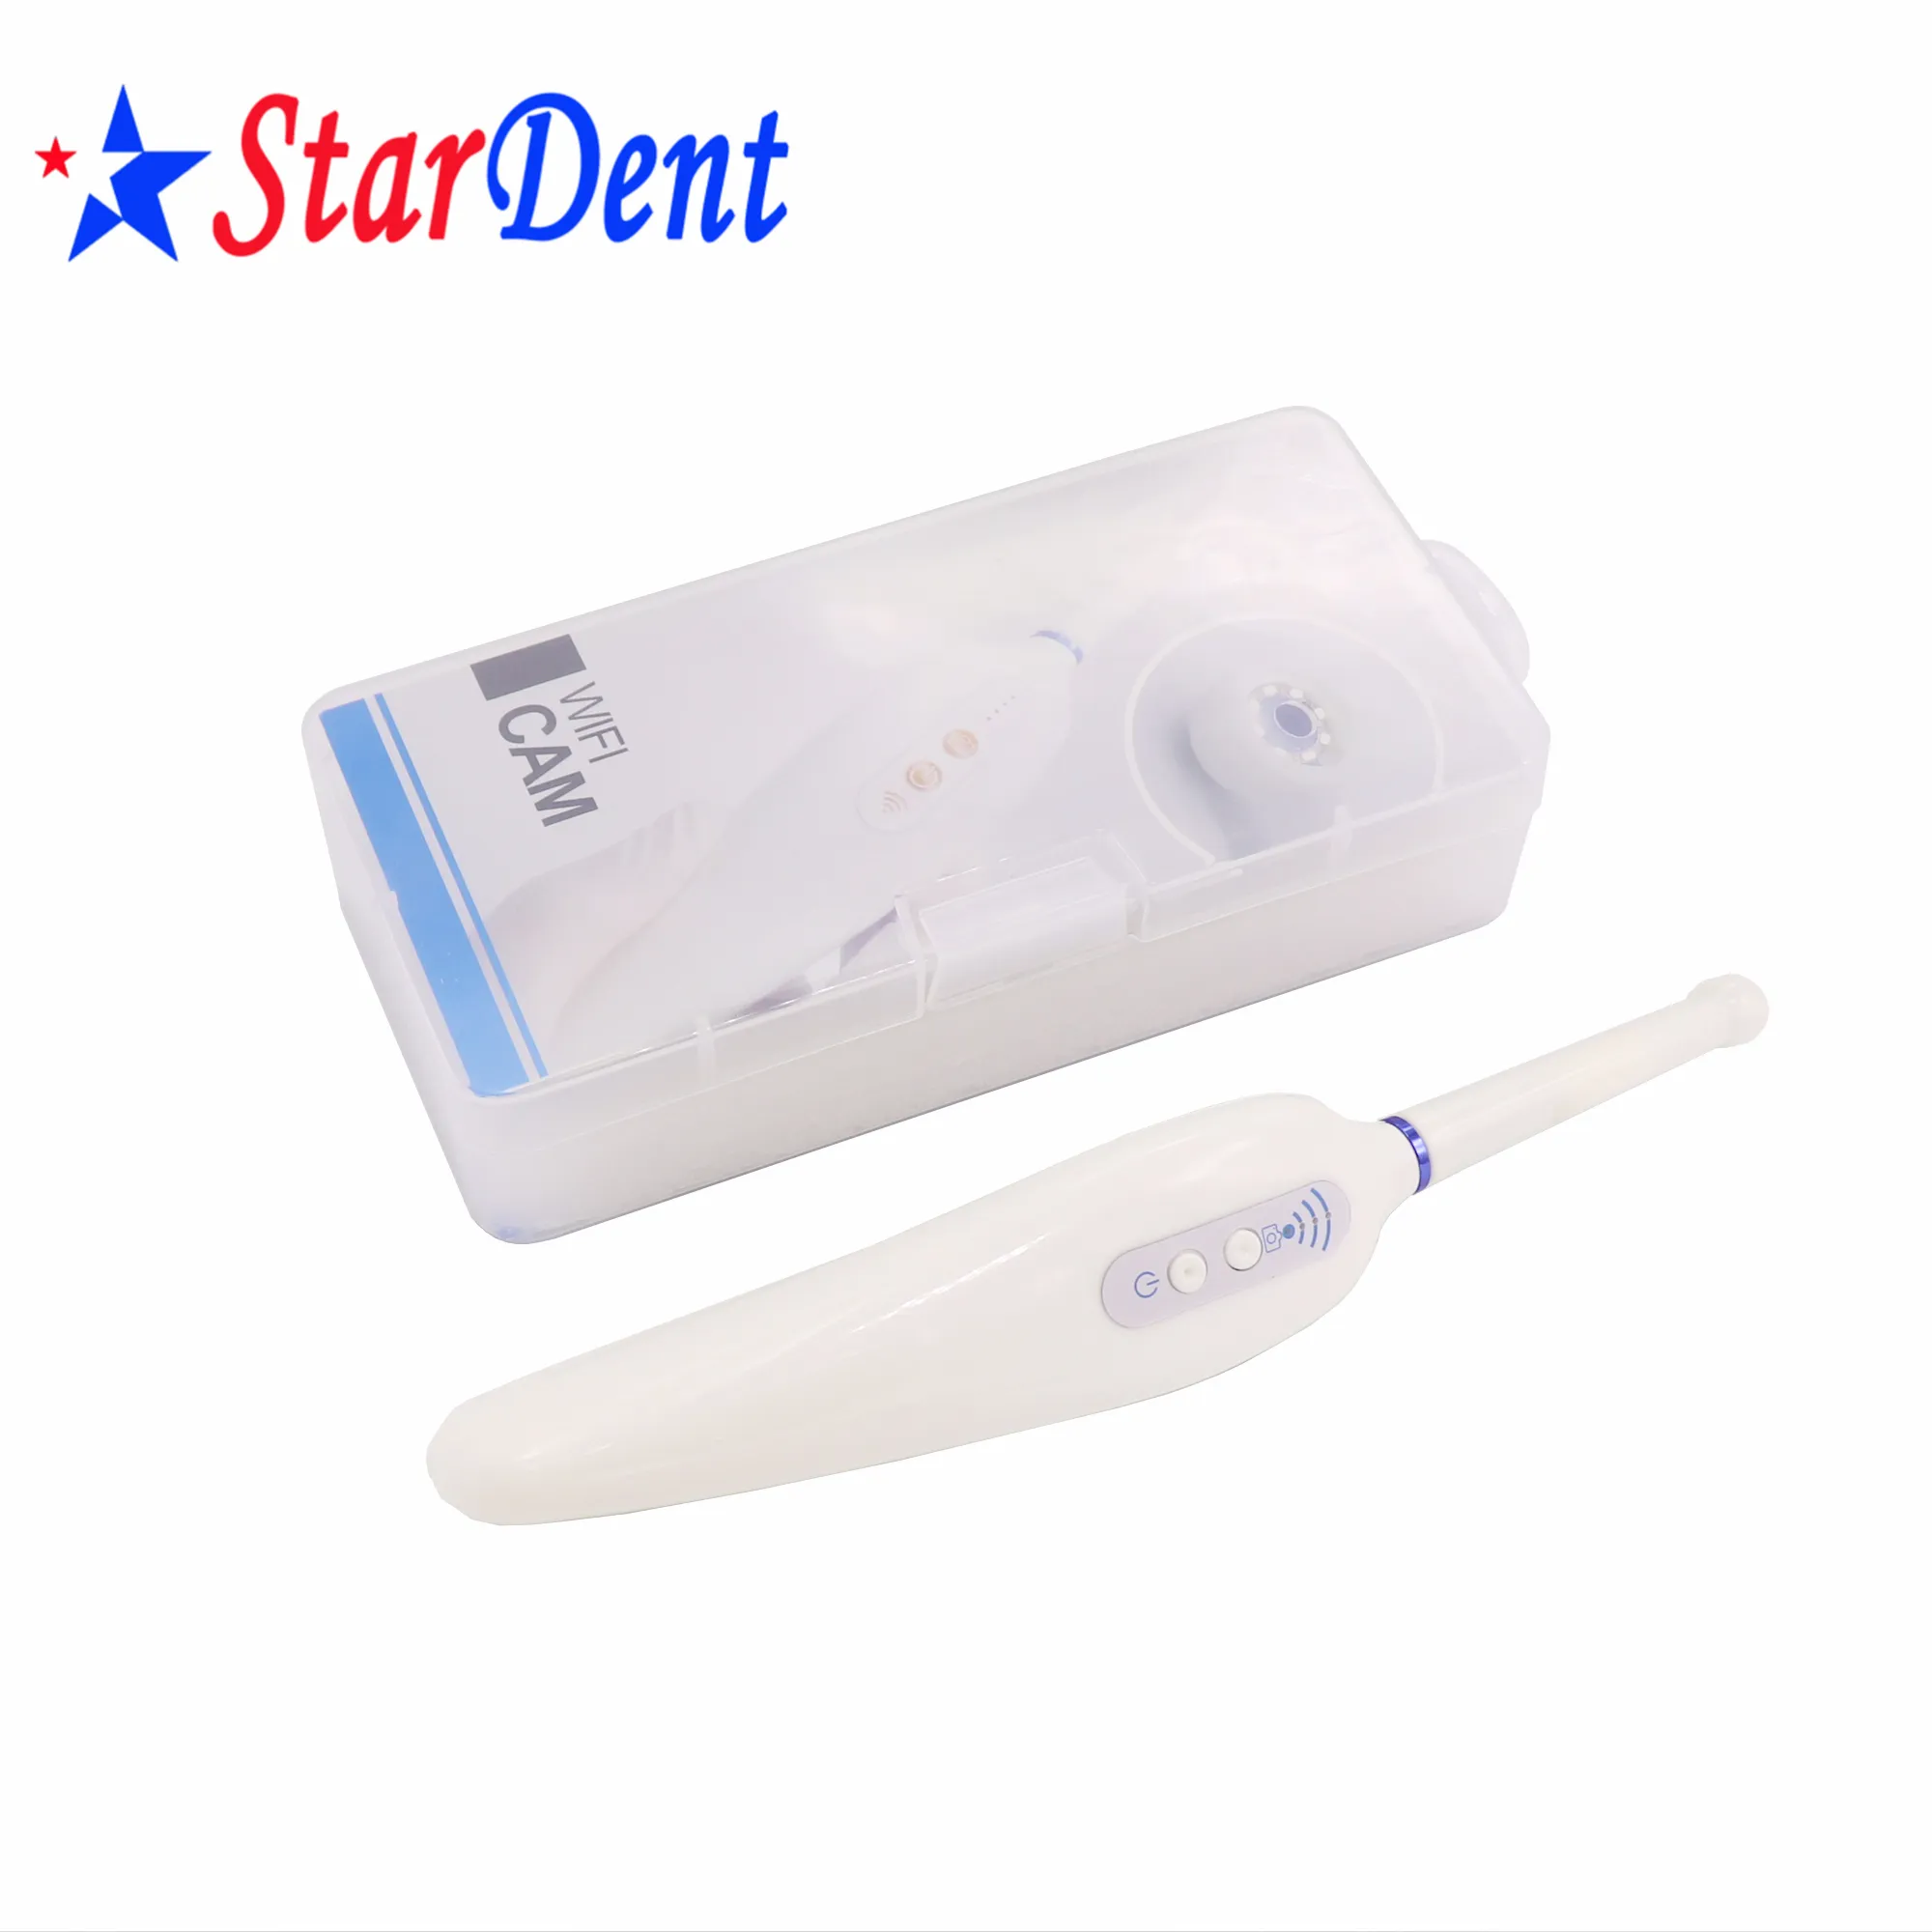 Dental WIFI Intraoral Camera USE Mobile Phone With Special Price /Dental Camera/Dental Product